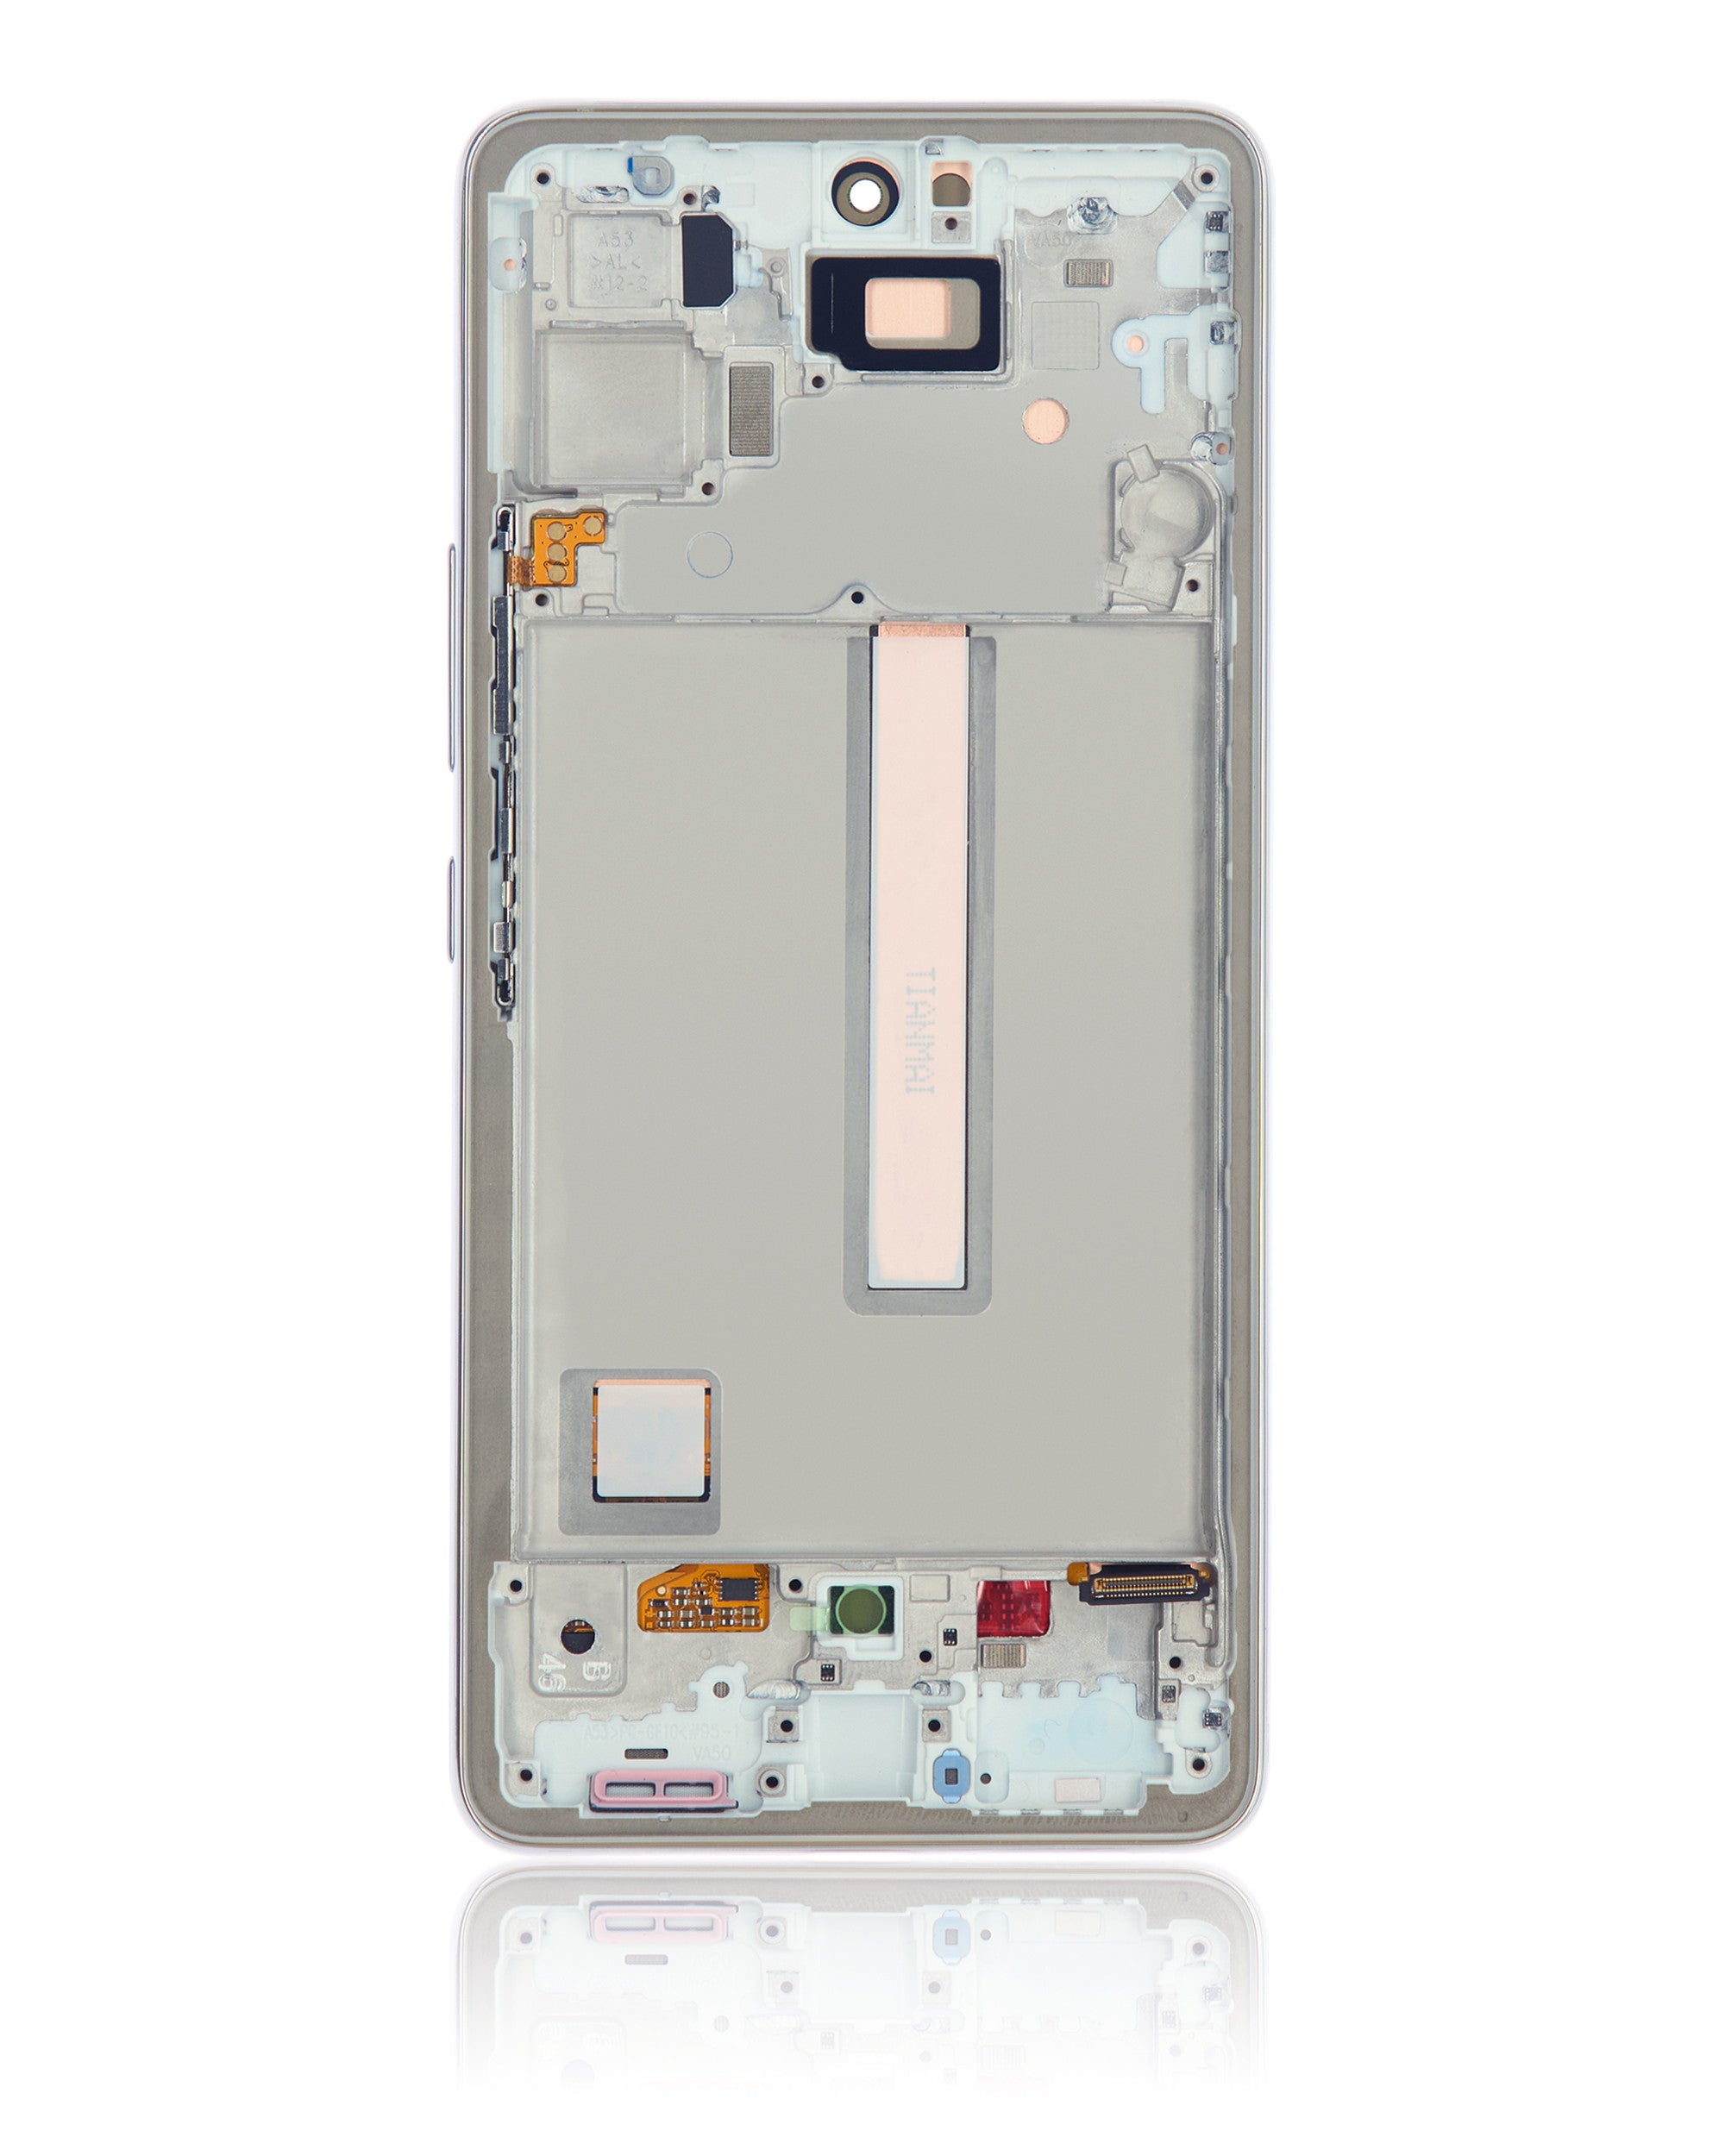 For Samsung Galaxy A53 5G (A536 / 2022) (6.36") OLED Screen Replacement With Frame (Oled Pro) (White)